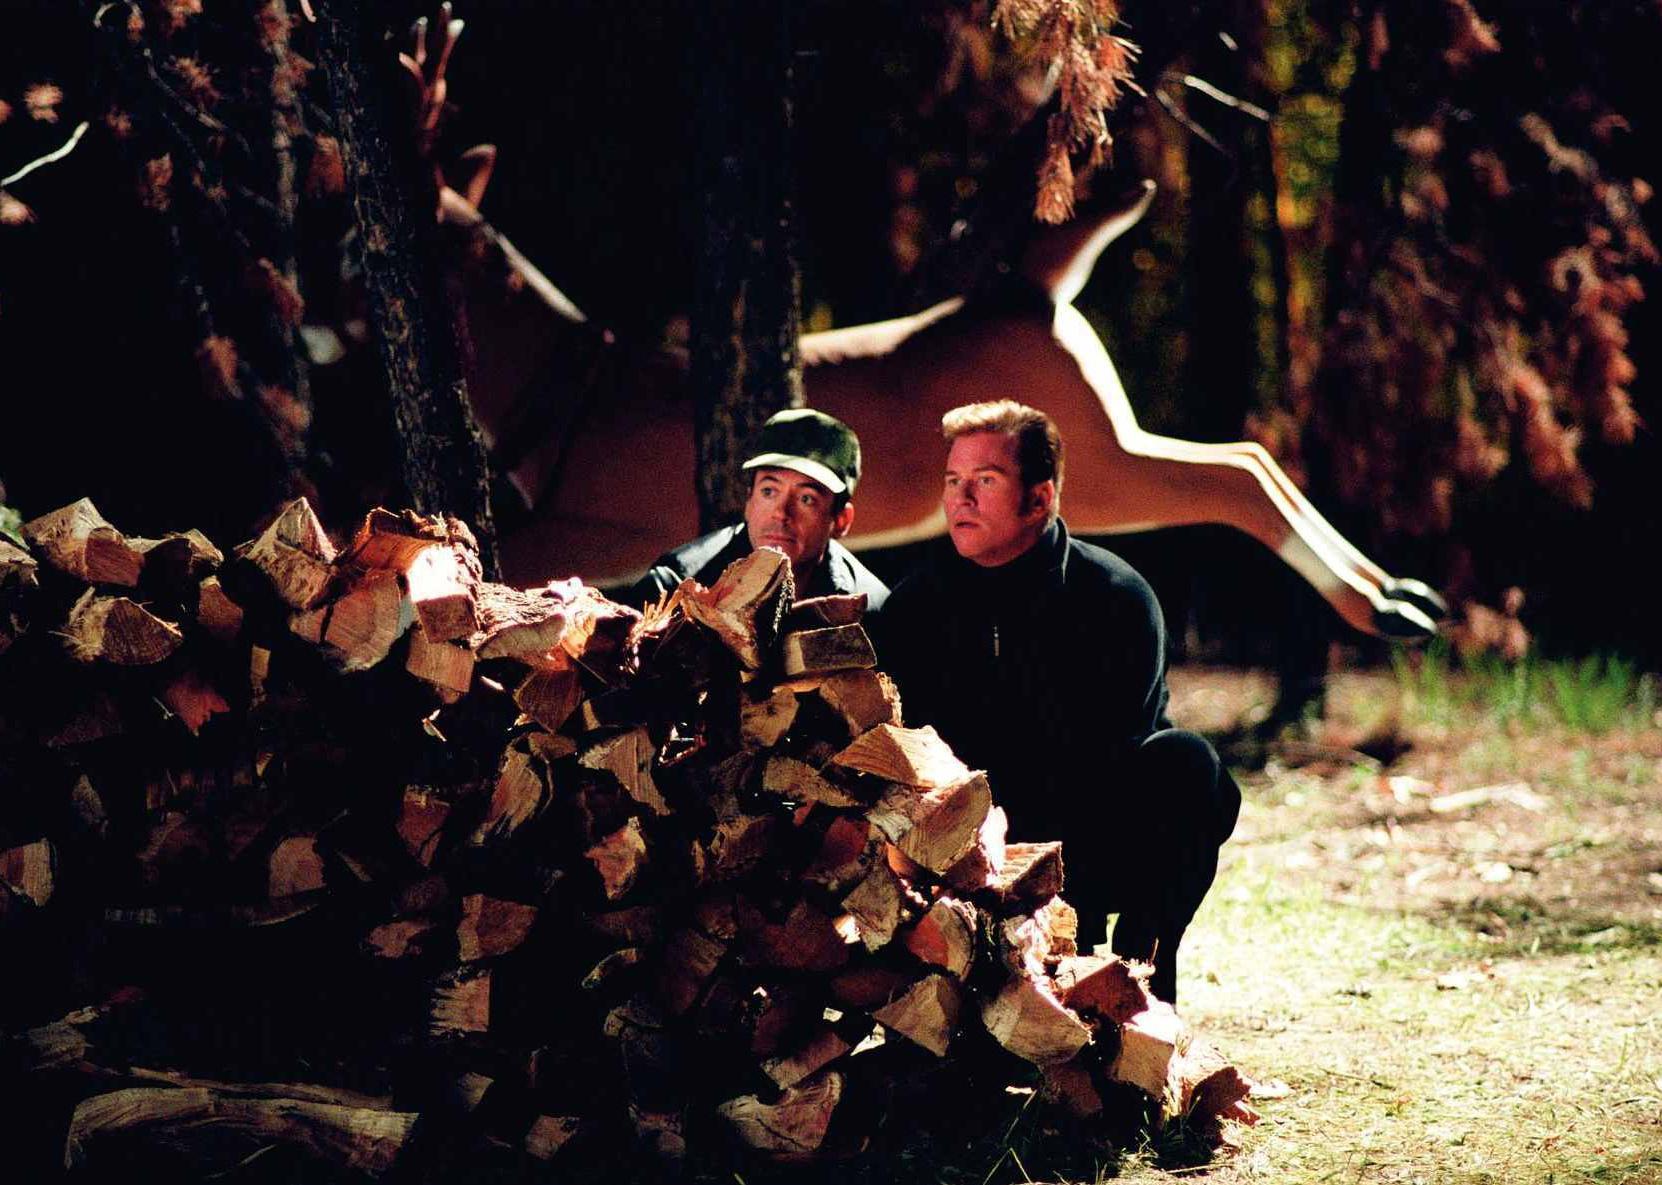 Val Kilmer and Robert Downey Jr. hiding behind a wood pile with a deer jumping in the background.